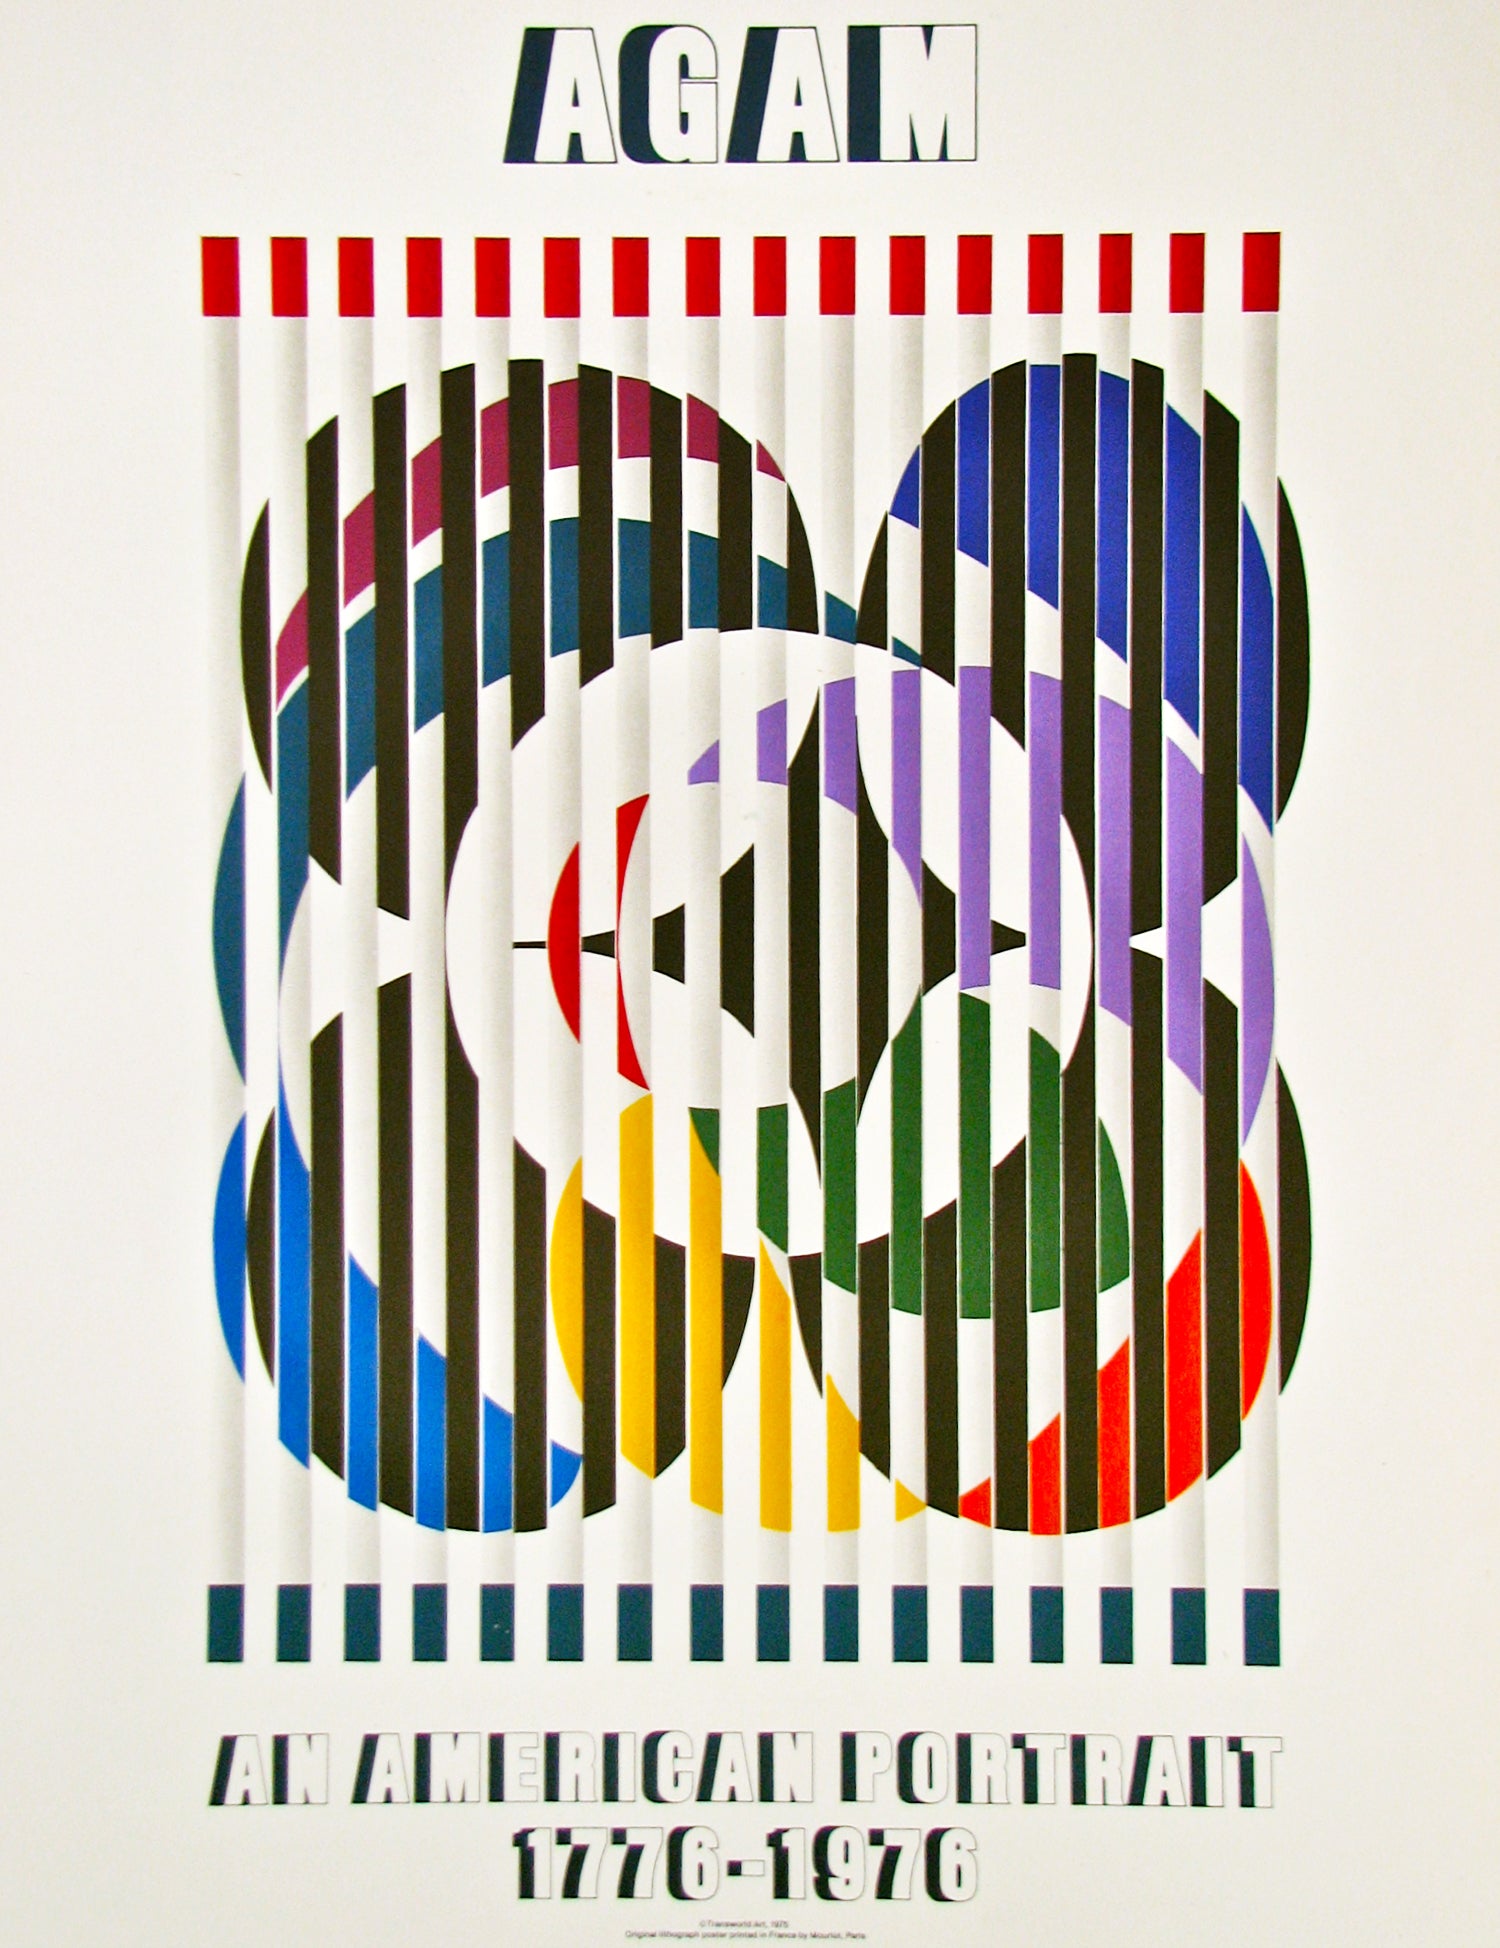 Birth of a Flag - An American Portrait (after) Yaacov Agam, 1976 - Mourlot Editions - Fine_Art - Poster - Lithograph - Wall Art - Vintage - Prints - Original